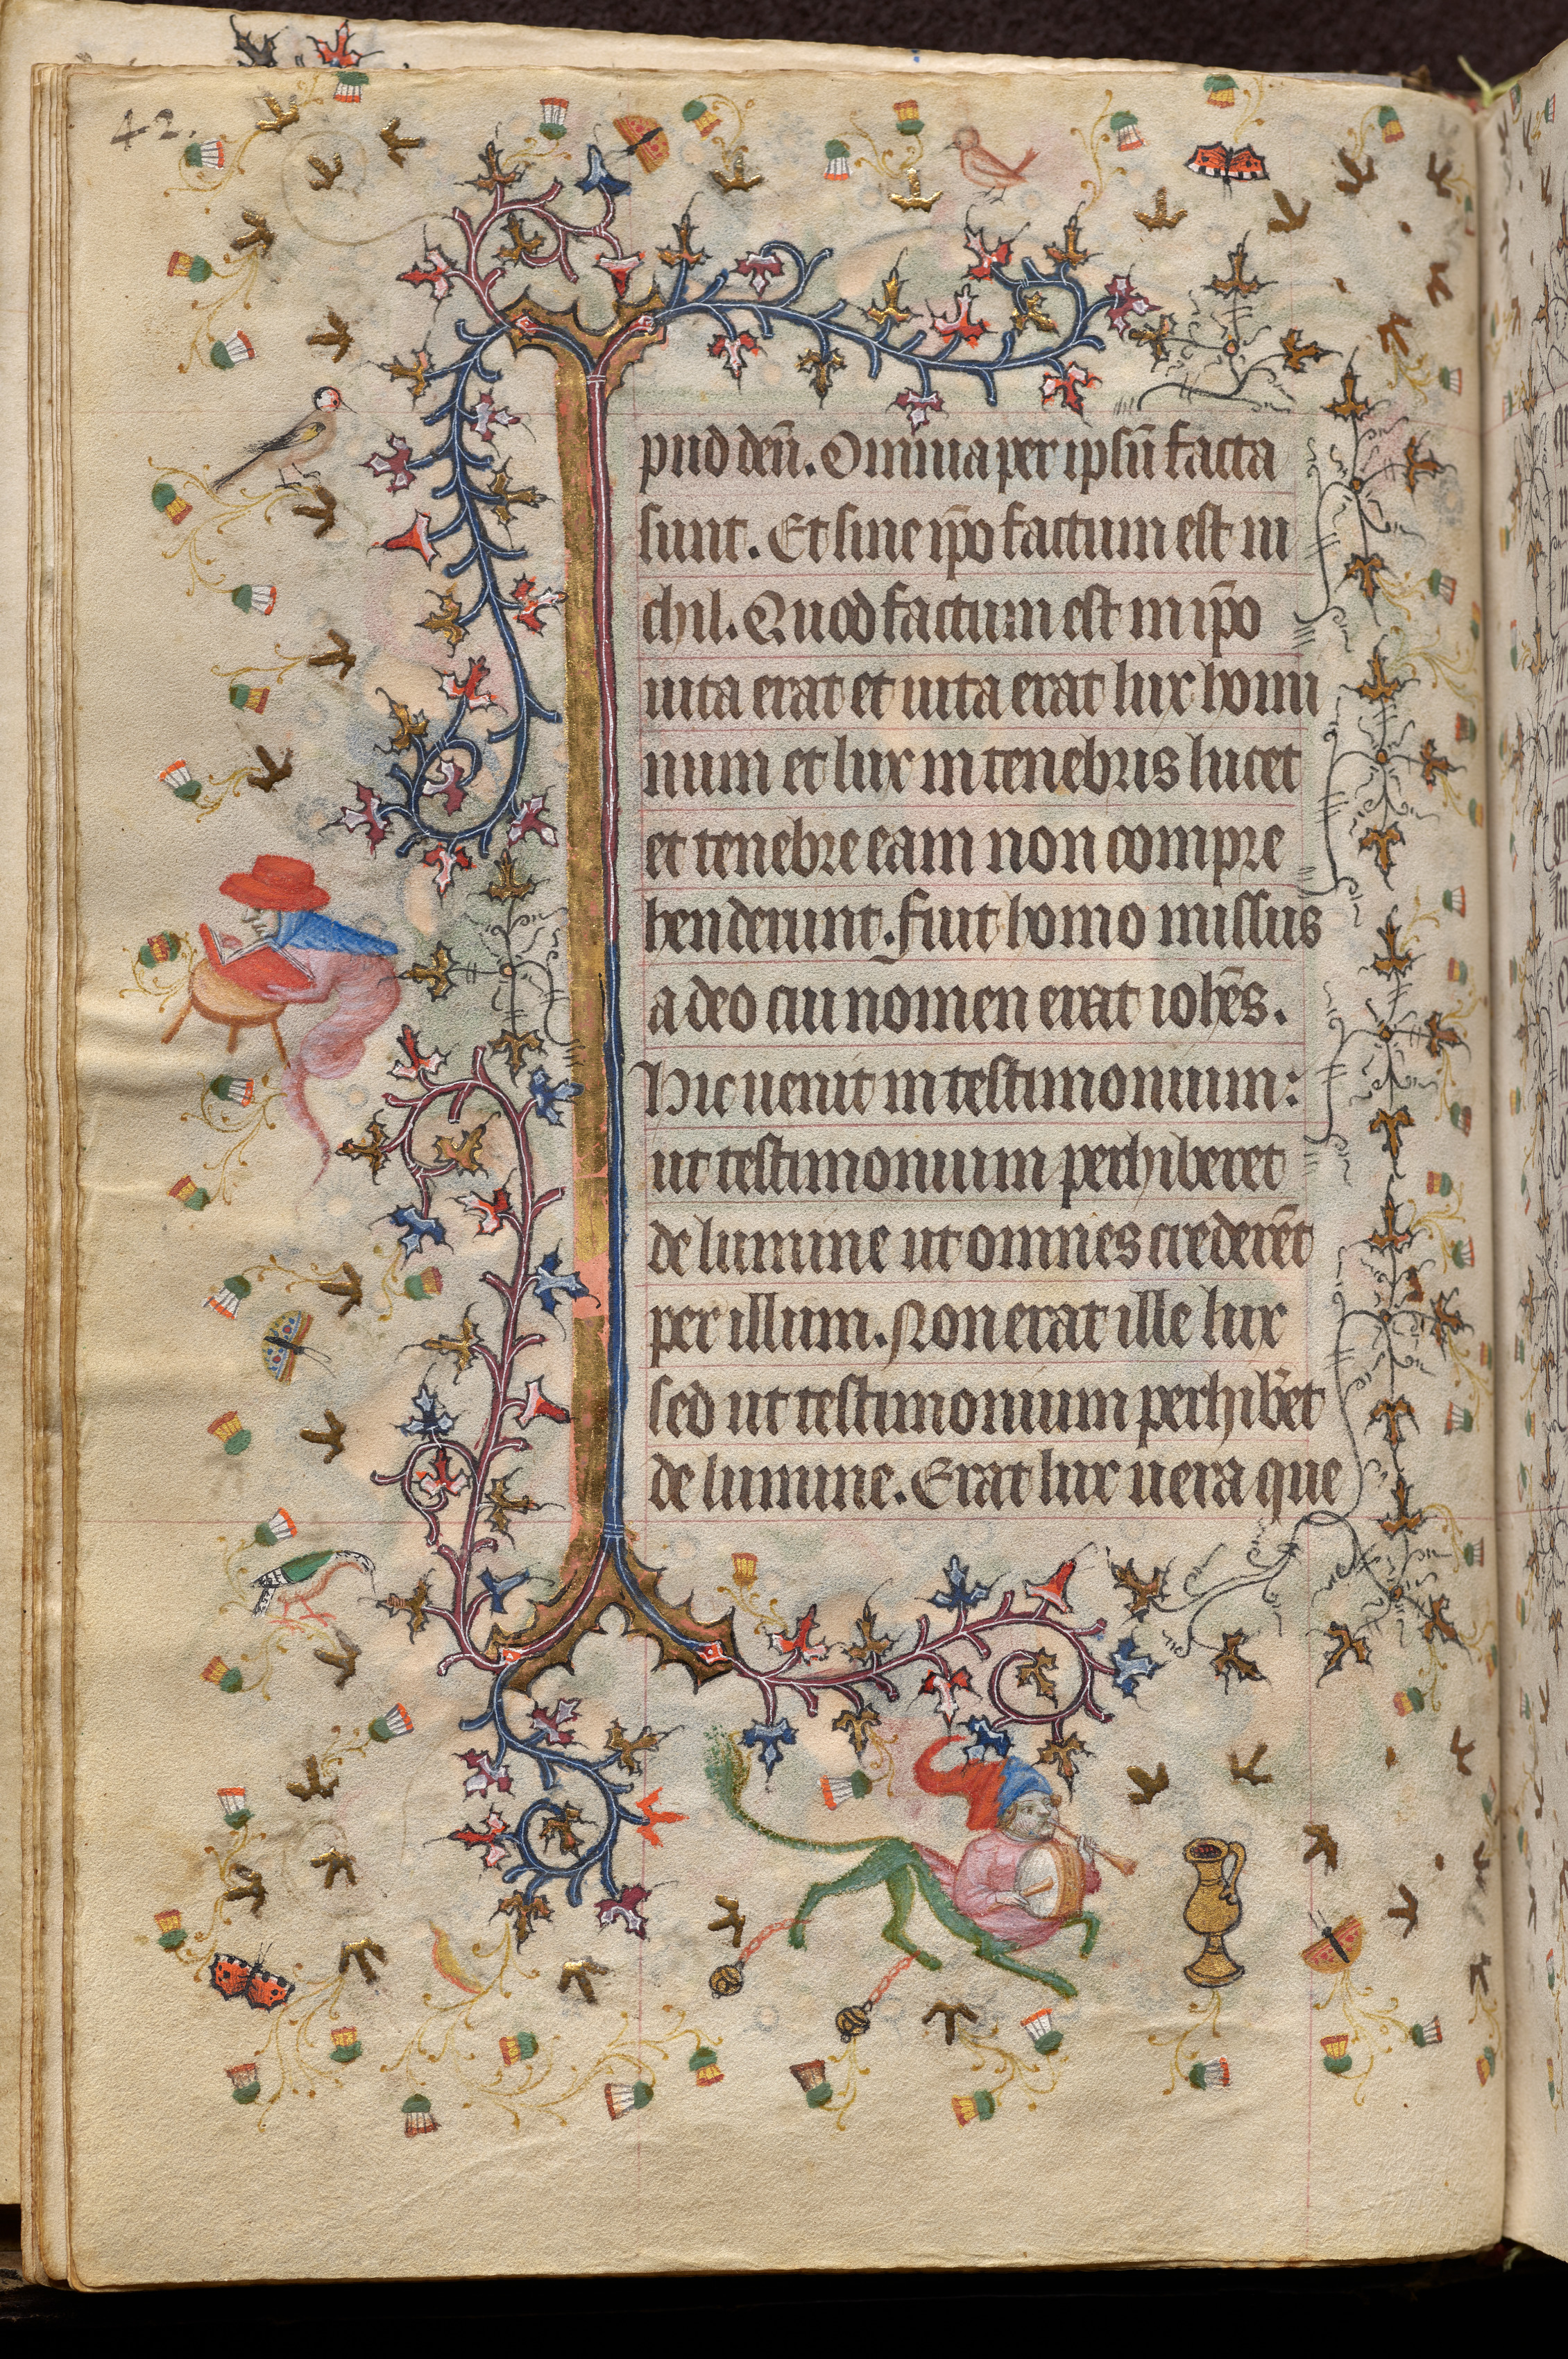 Hours of Charles the Noble, King of Navarre (1361-1425): fol. 21v, Text